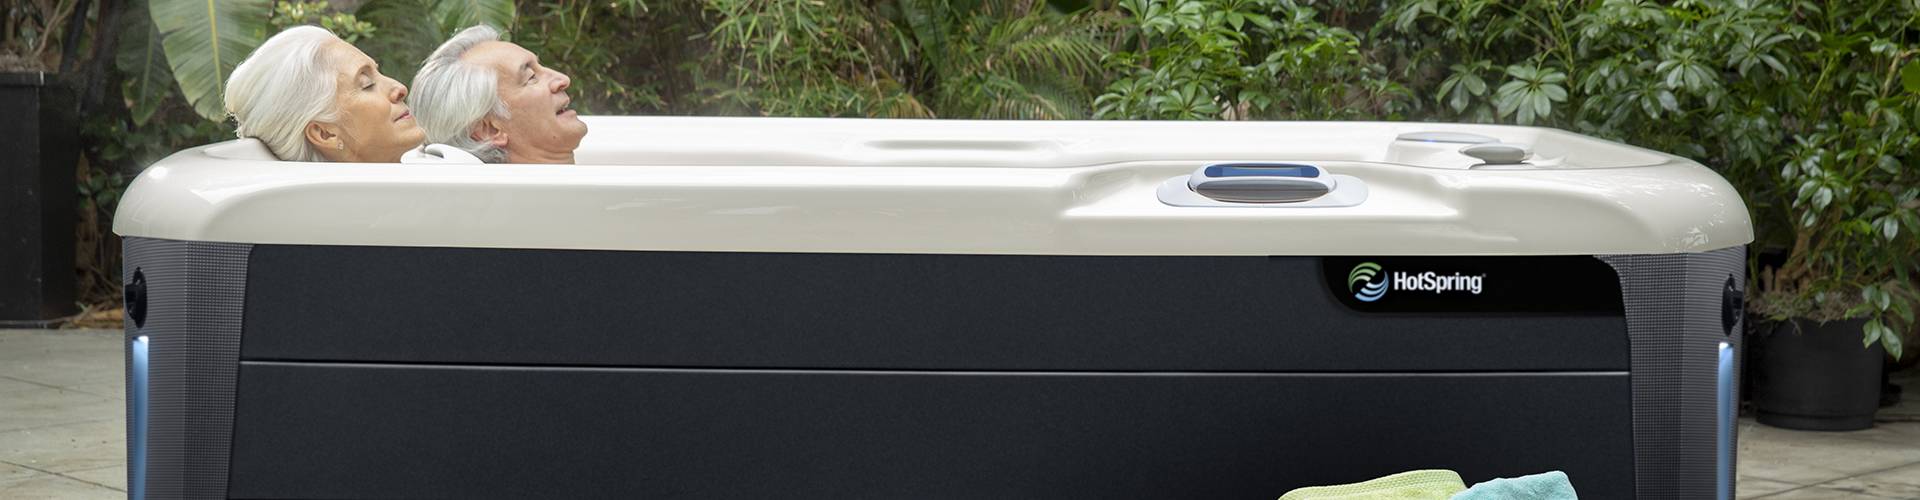 Choosing the Best Hot Tub for Lower Back Pain